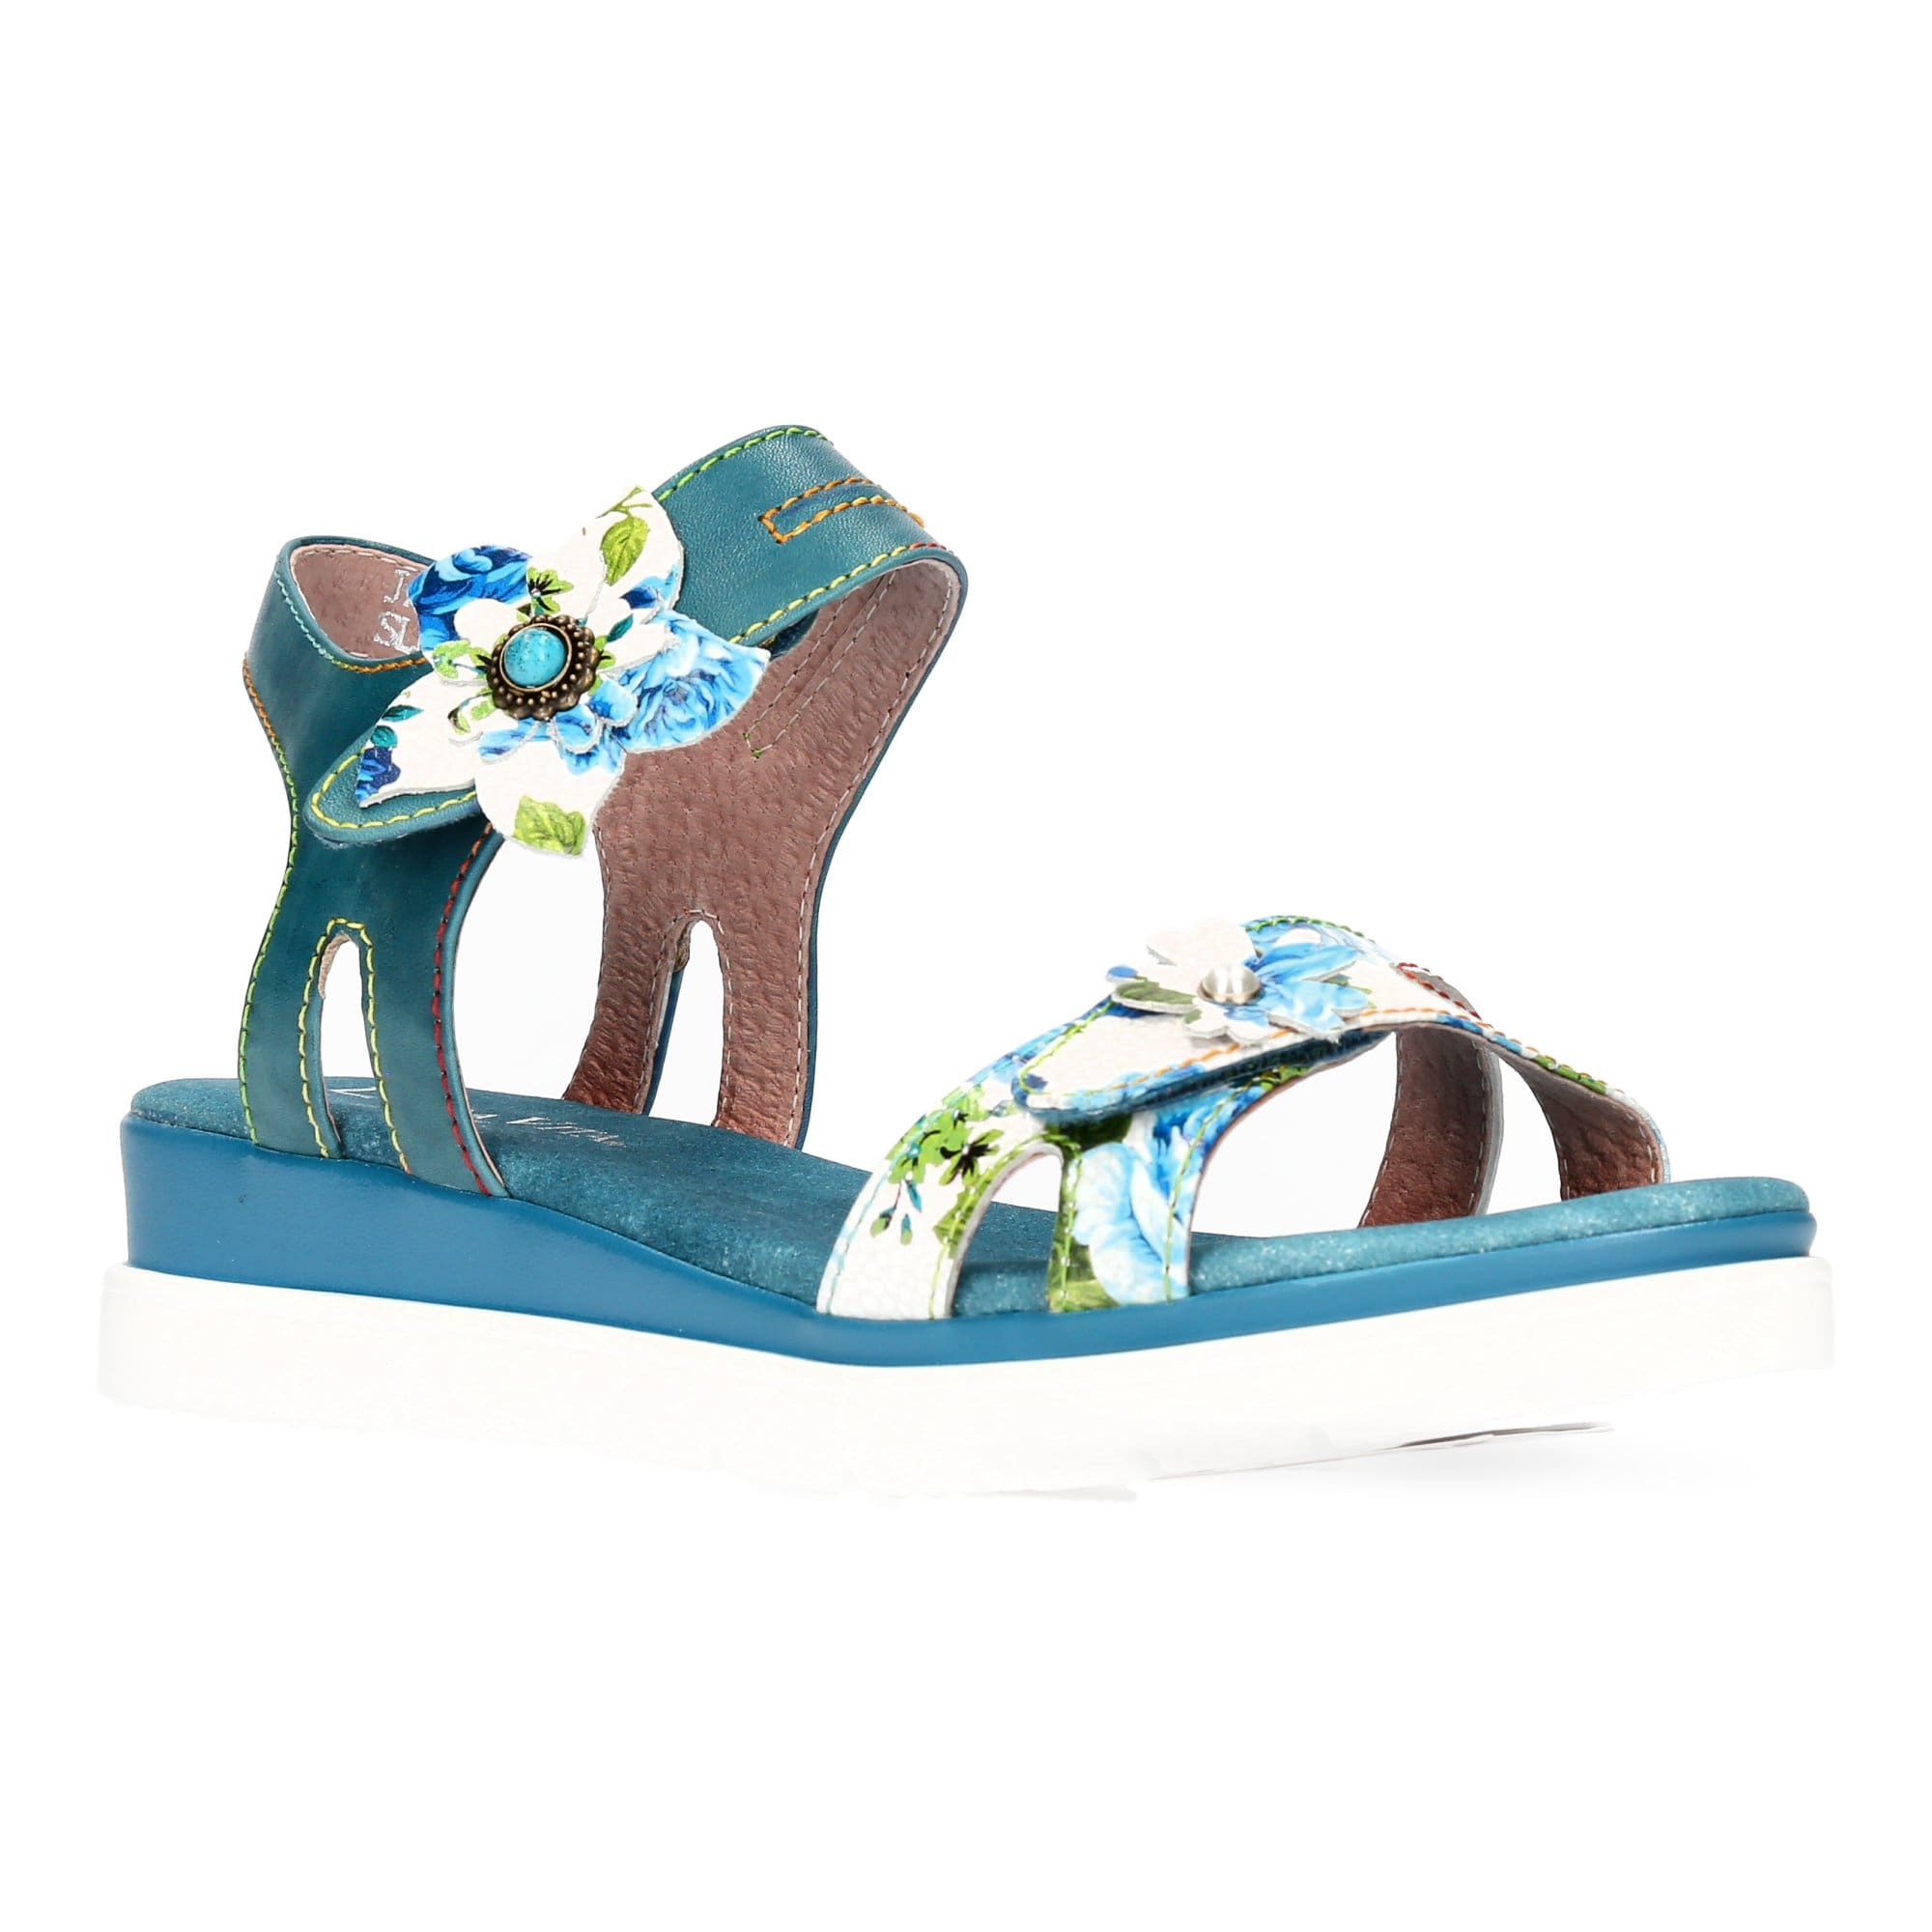 Chaussures JACCEEO 06 - Sandale